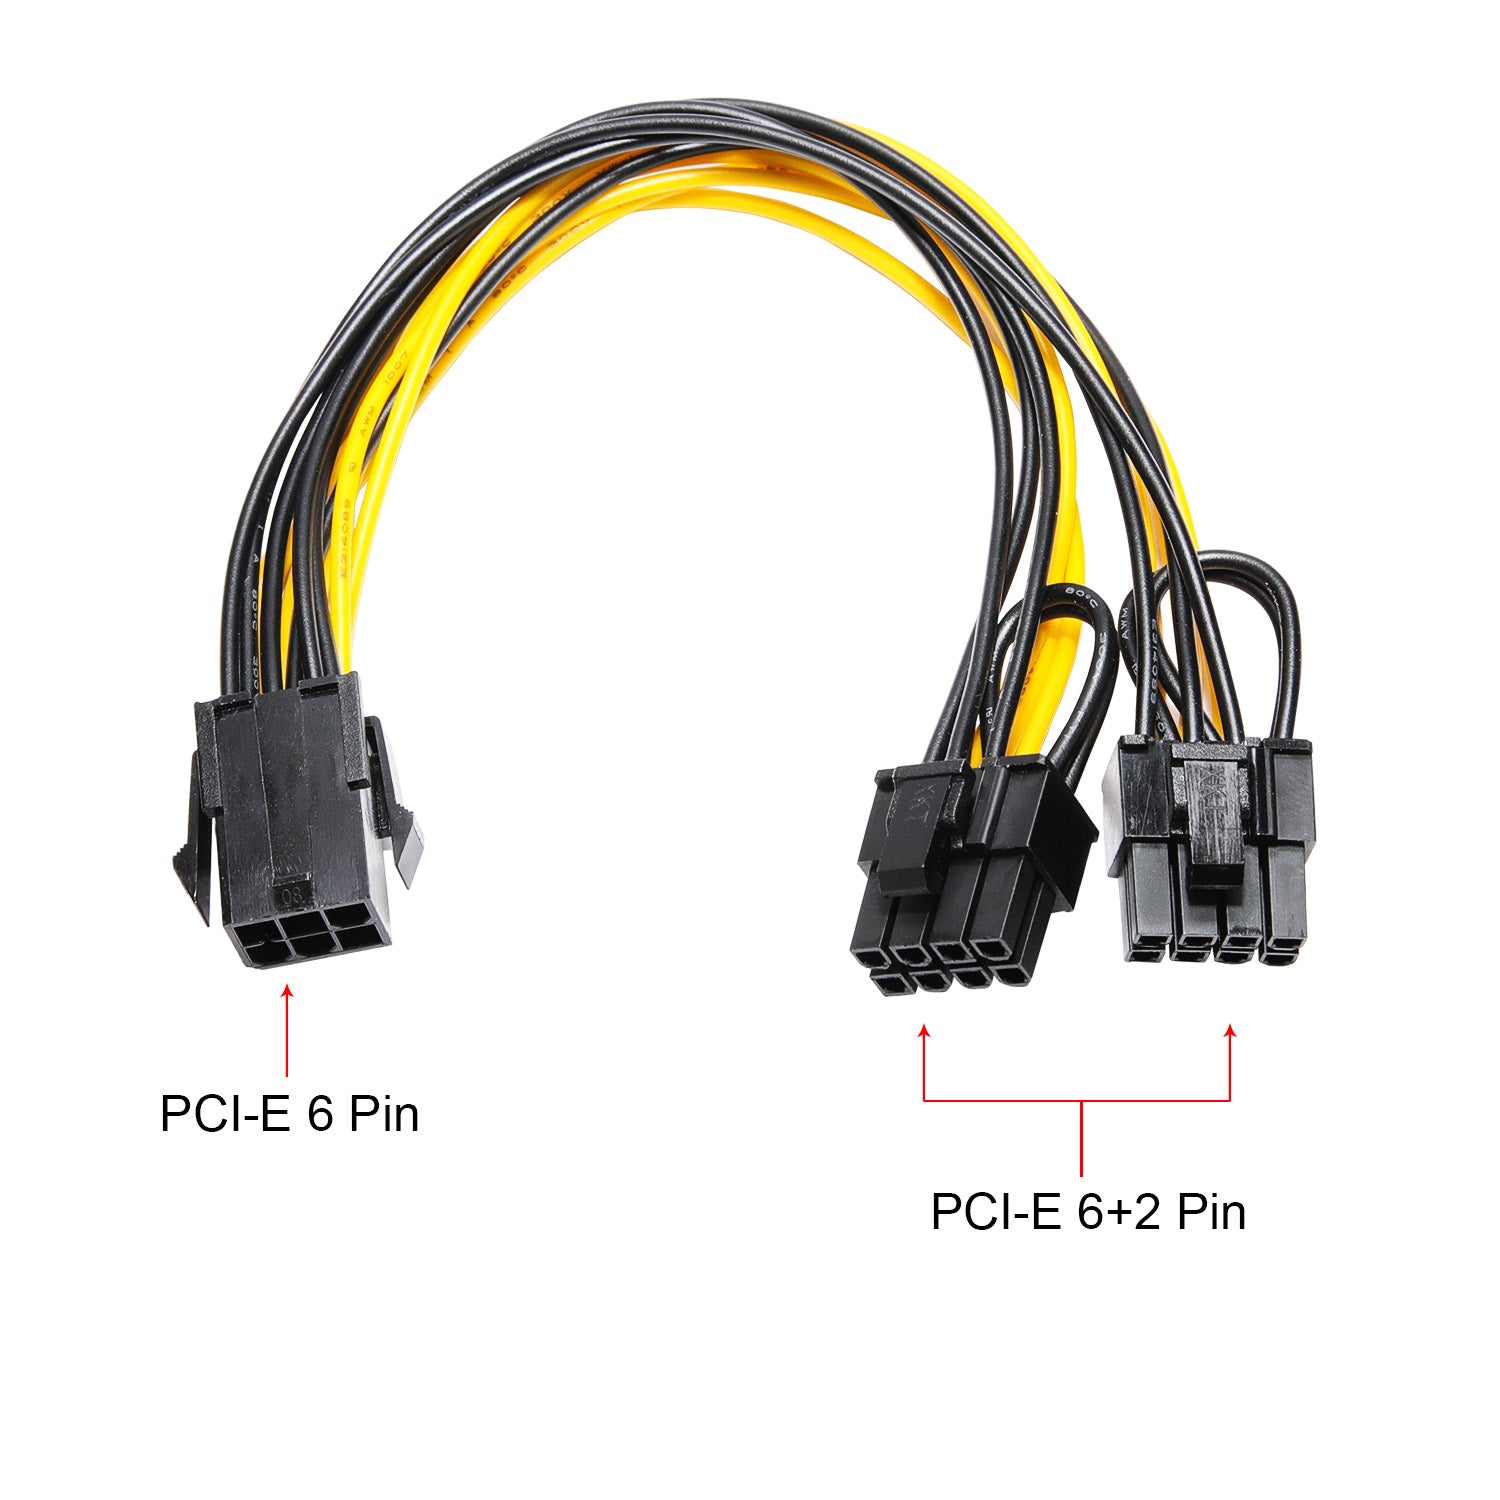 6 Pin to 8 Pin (6+2) PCIe Adapter Power Cable for EVGA Modular Power Supply Mining Video Card Extension Cable 6 pin Female to 8 Pin Male Power Cable 8.86 Inches（2PCS）